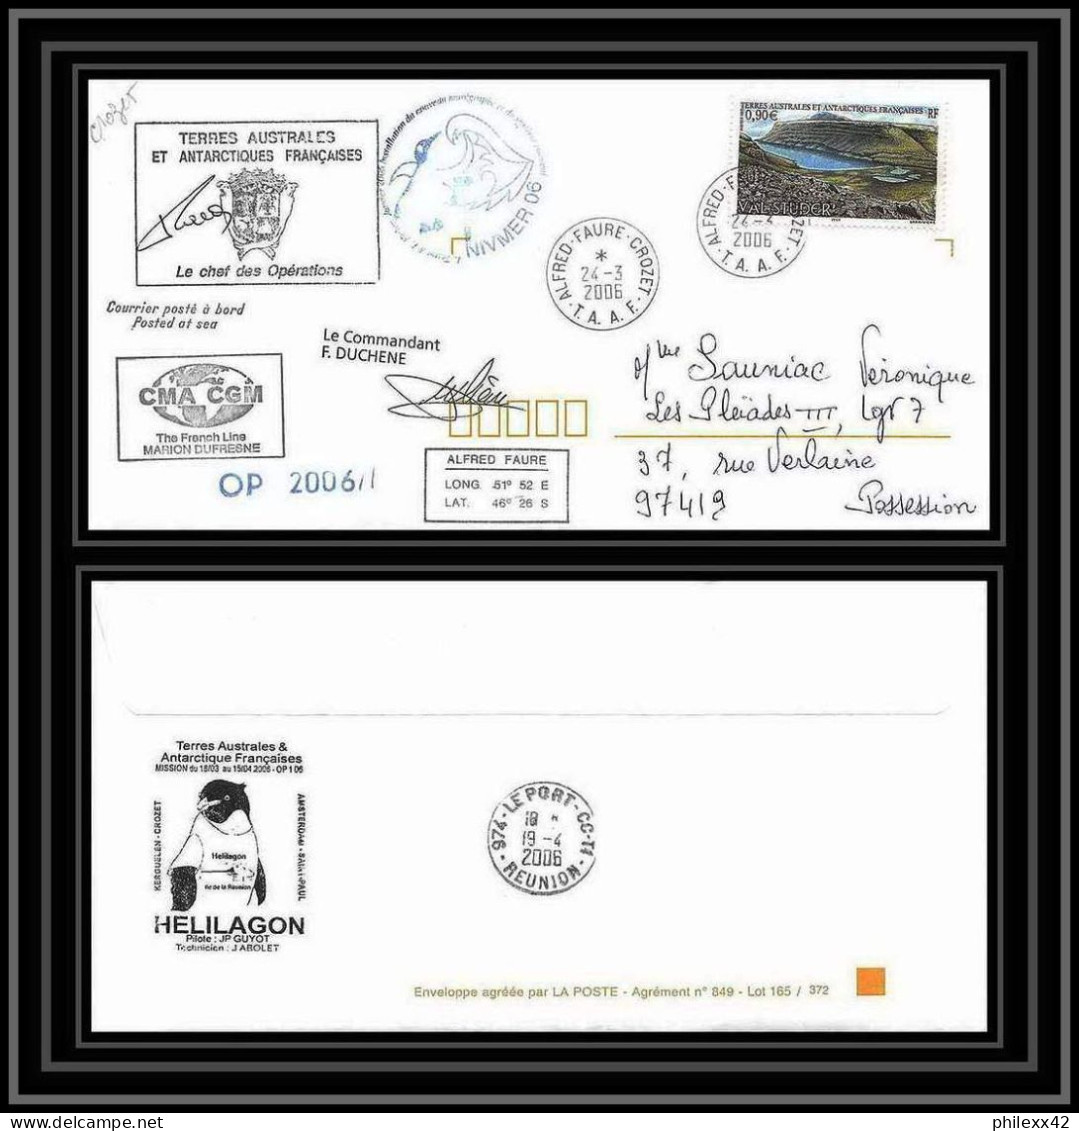 2567 ANTARCTIC Terres Australes TAAF Lettre Cover Dufresne 2 Signé Signed OP 2006/1 CROZET N°410 24/3/2006 Helilagon - Helicopters